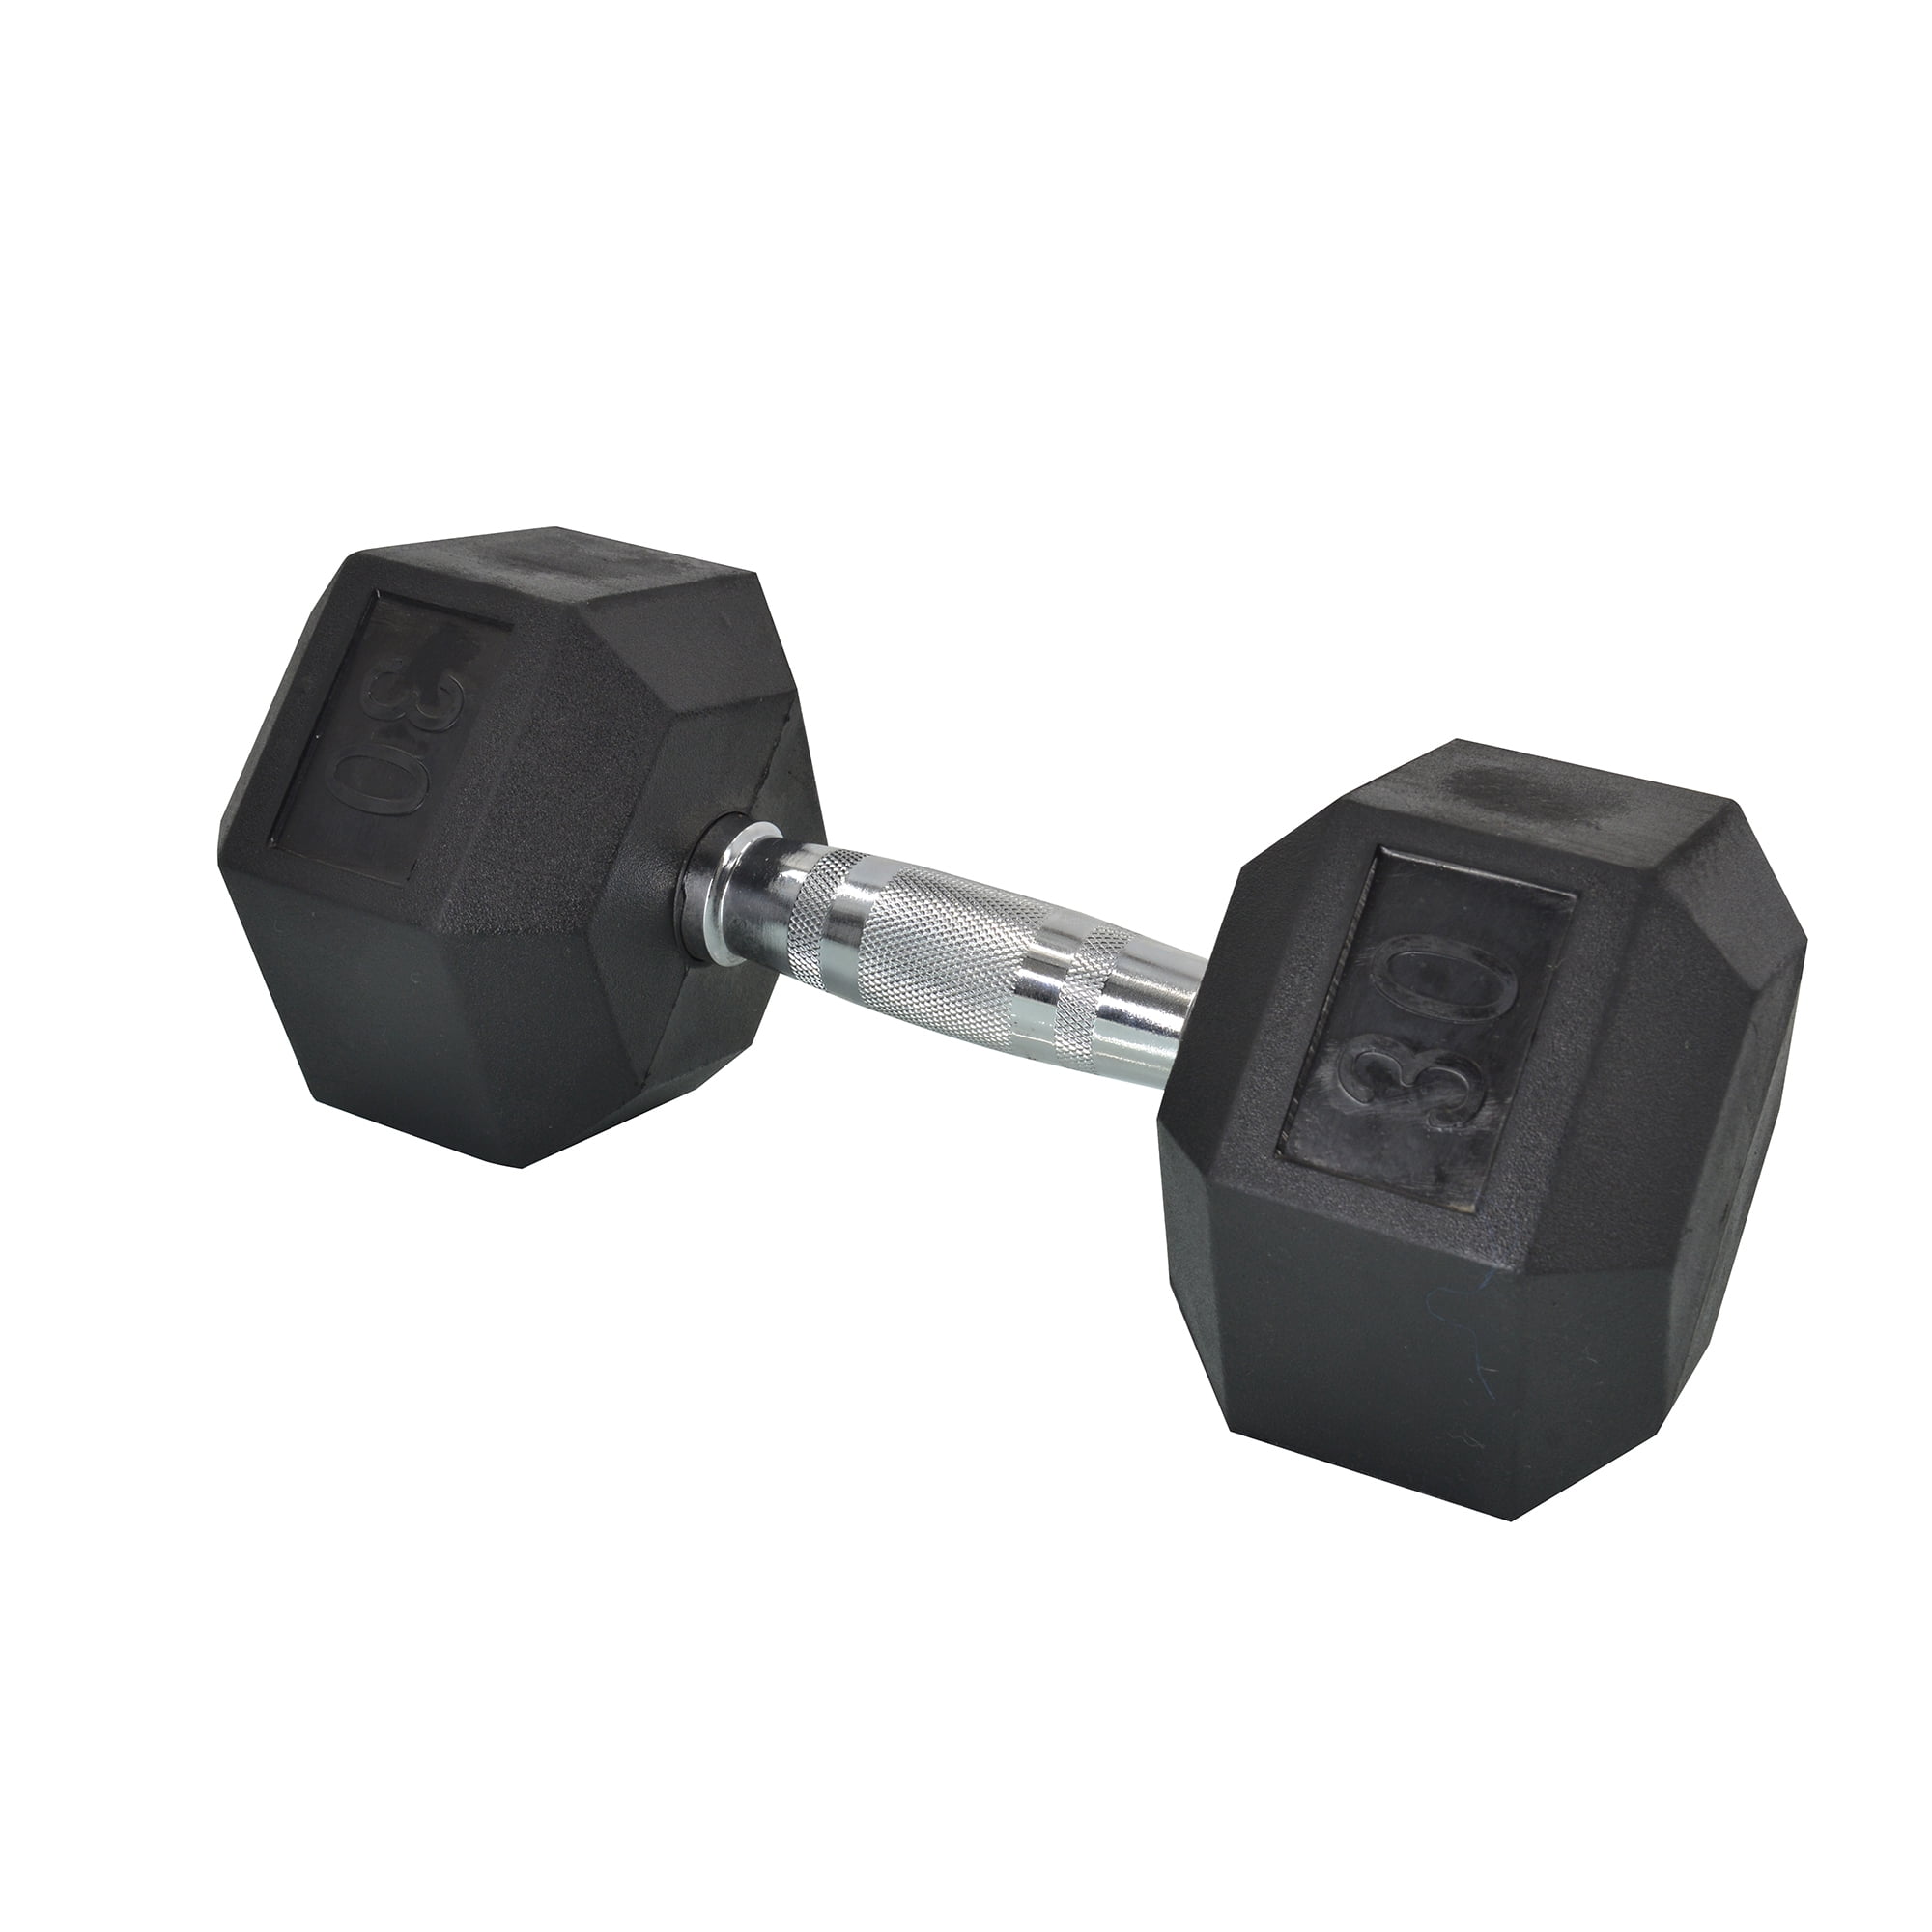 20 25 Hexagonal Hex Rubber Dumbbells 15 30 35 40 lbs Weights for Home Gym 